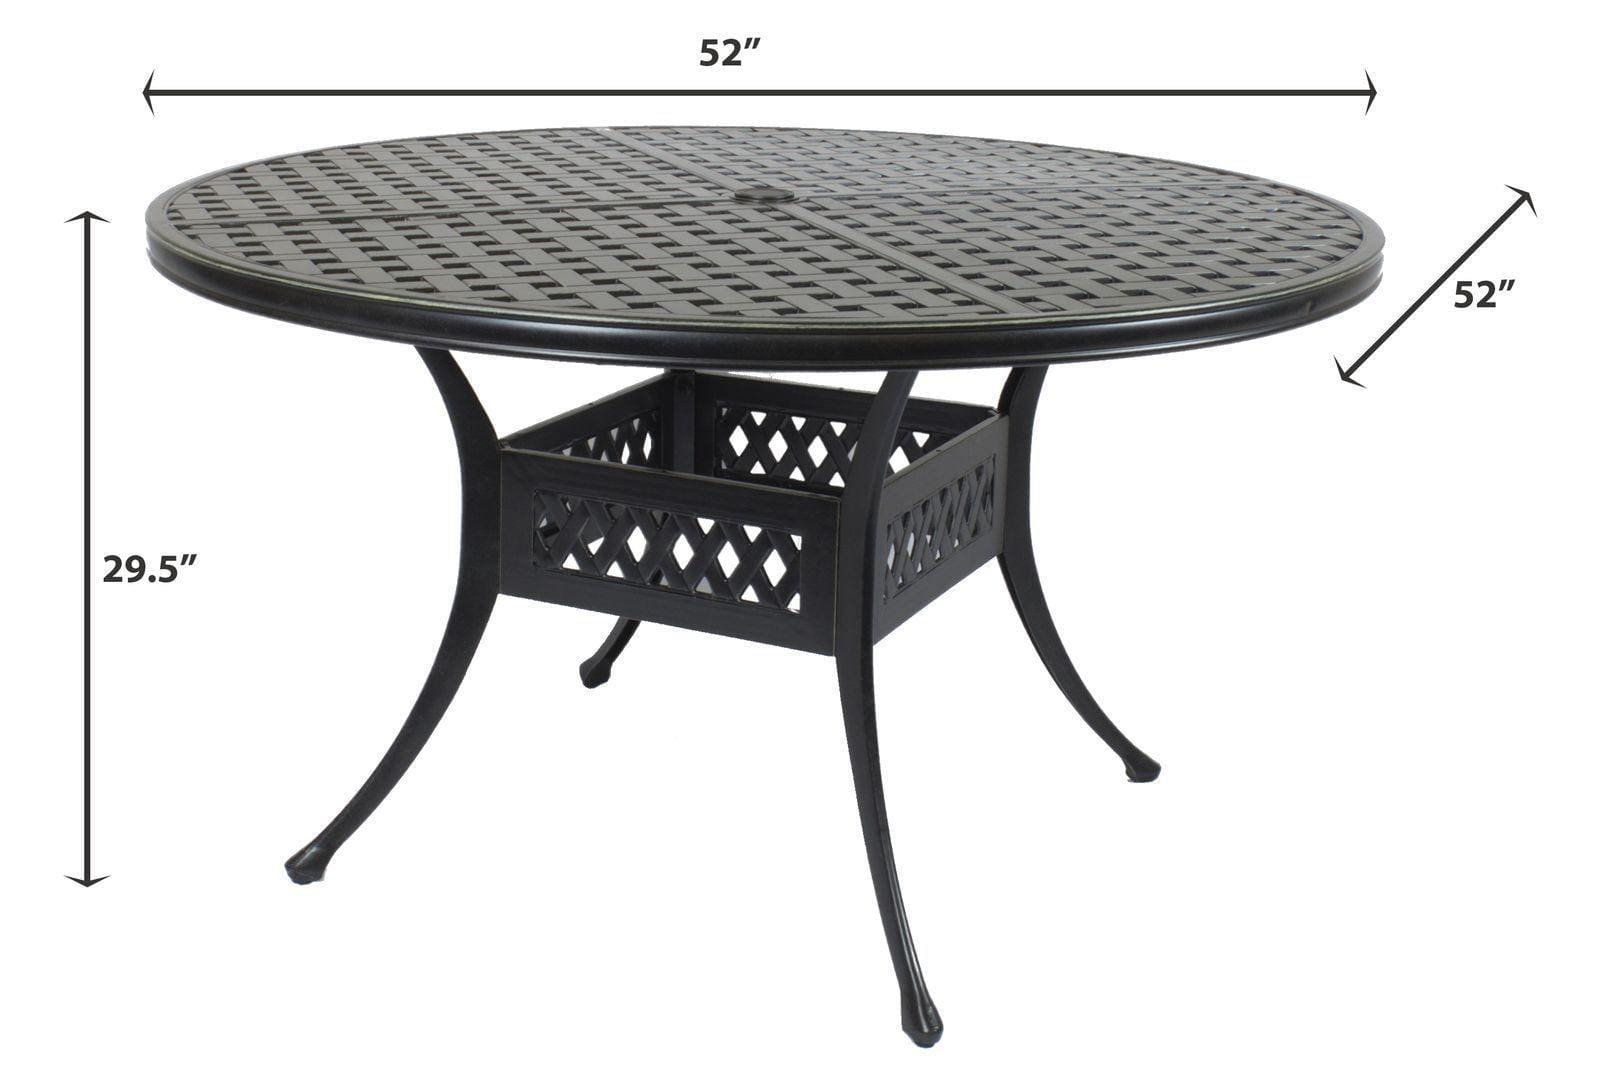 Lawton Casual Comfort Outdoor Dining Set Lawton Casual Comfort - Cast Aluminum 5 PC Dining Set with 52" Round Table abnd 4 Swivel Rocker Chairs